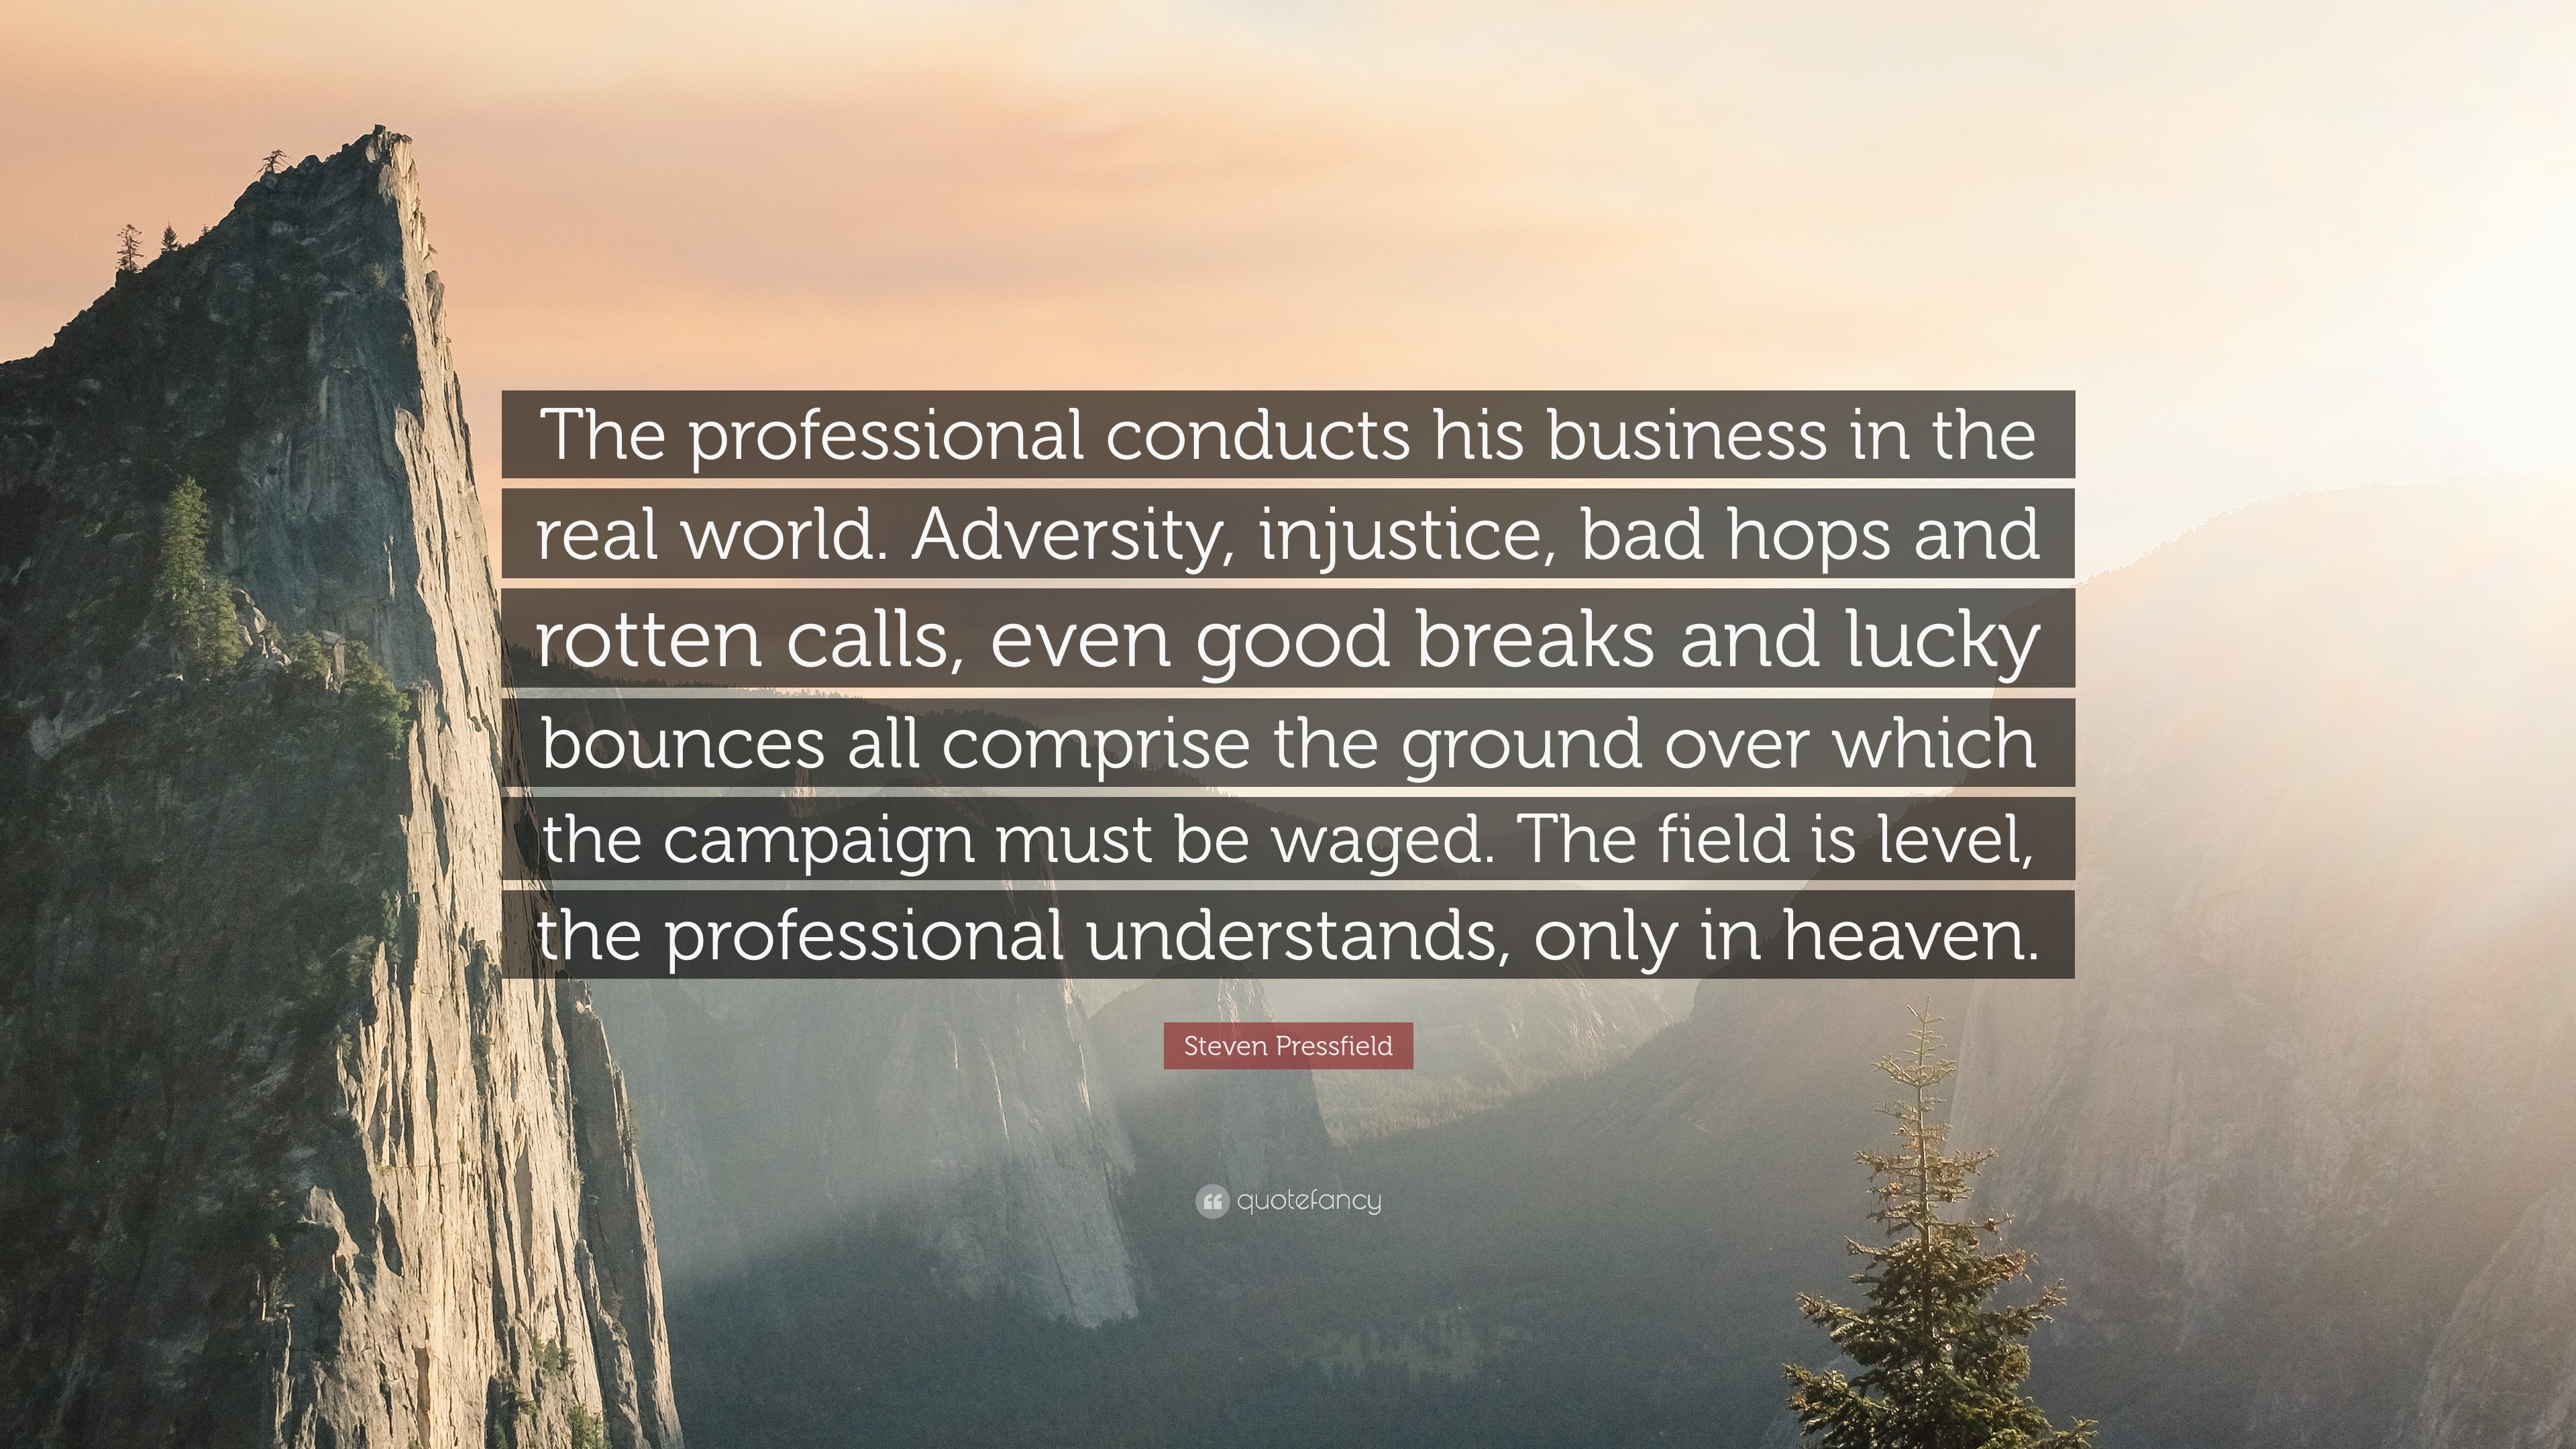 3840x2160 Steven Pressfield Quote: “The professional conducts his business in the  real world. Adversity